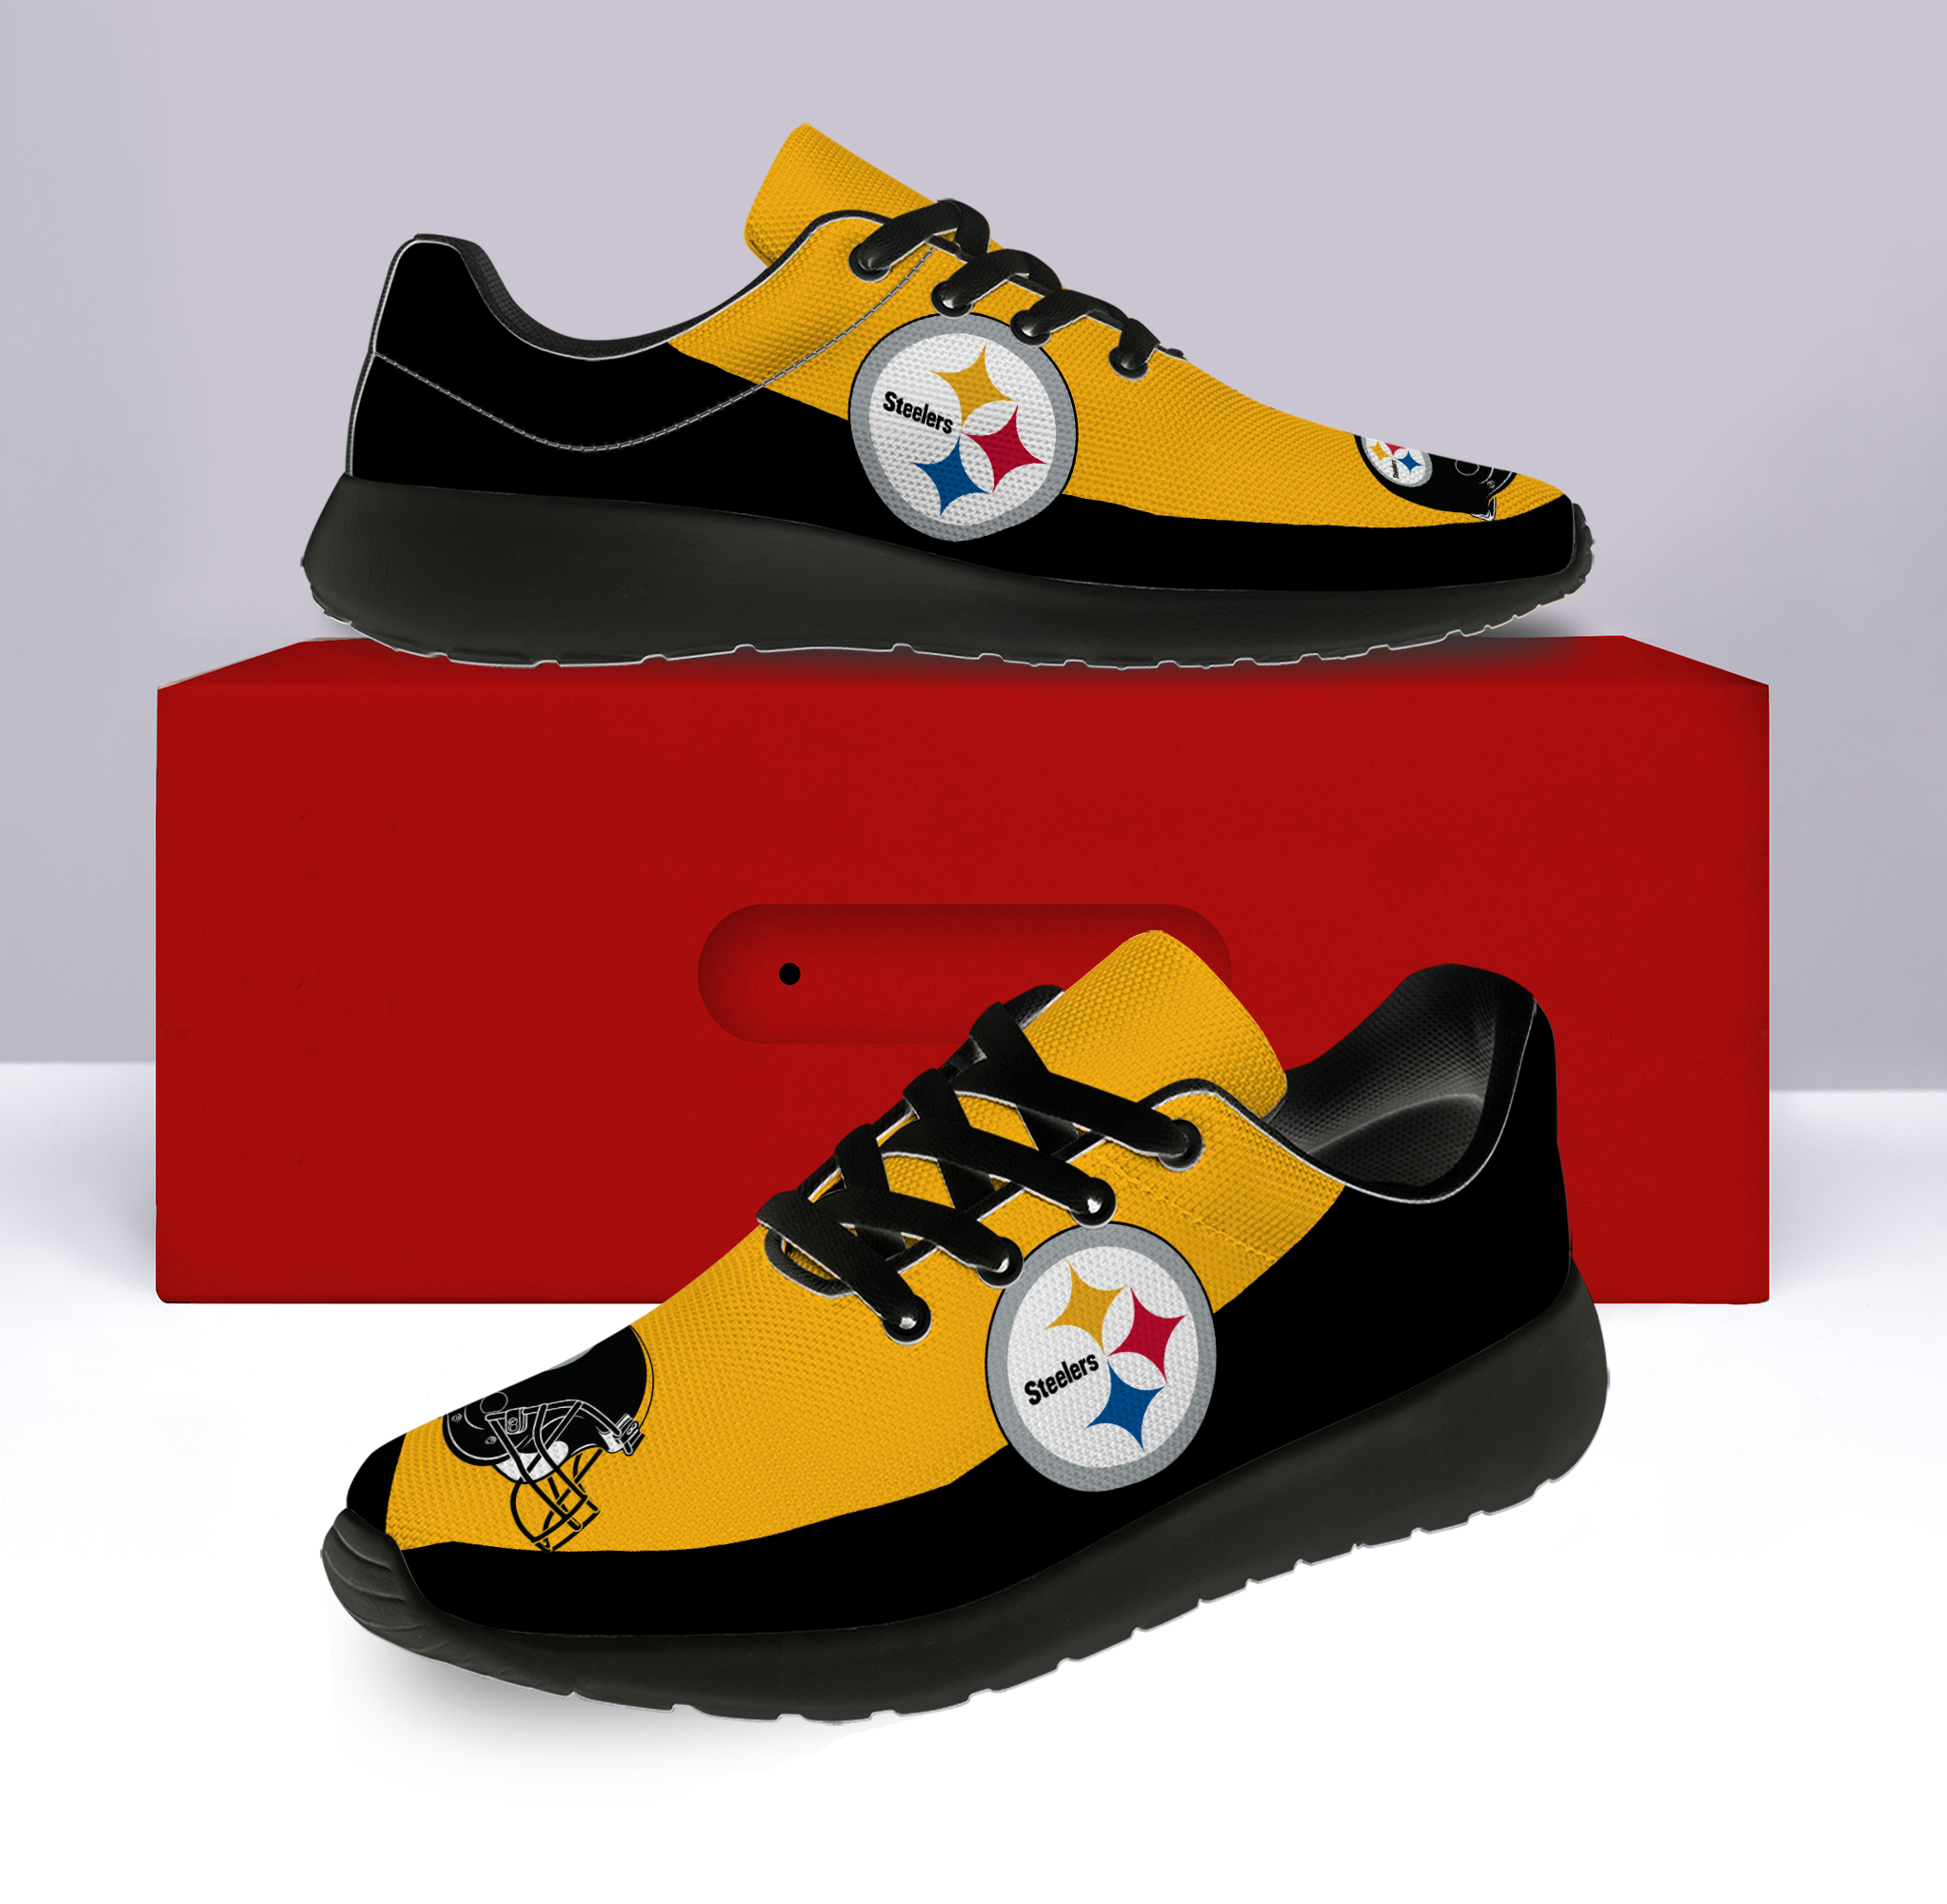 pittsburgh steelers sneakers for sale